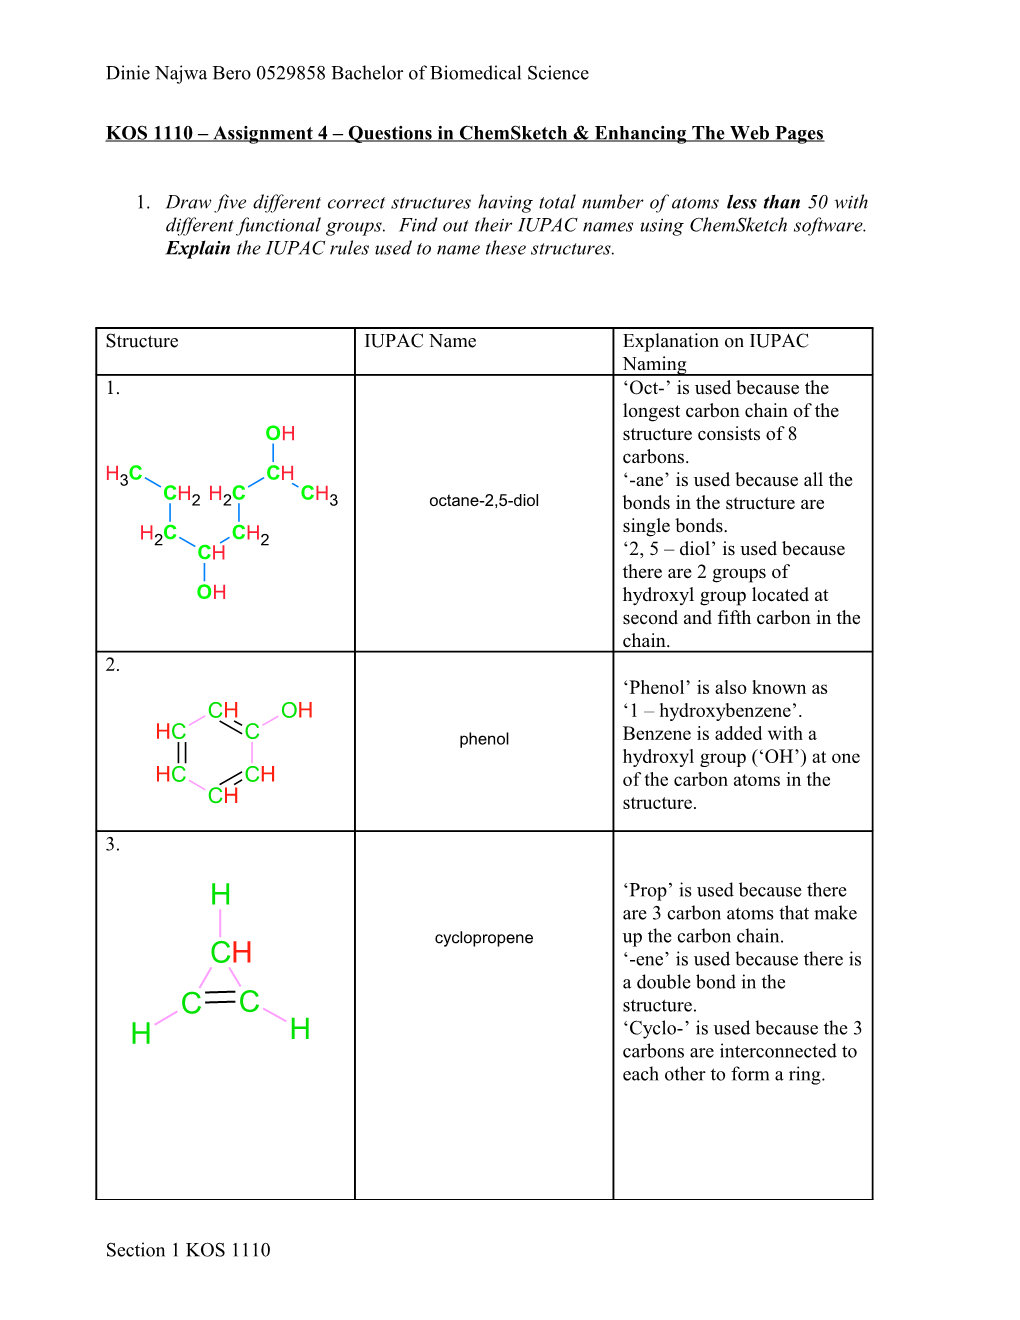 KOS 1110 Assignment 4 Questions in Chemsketch & Enhancing the Web Pages